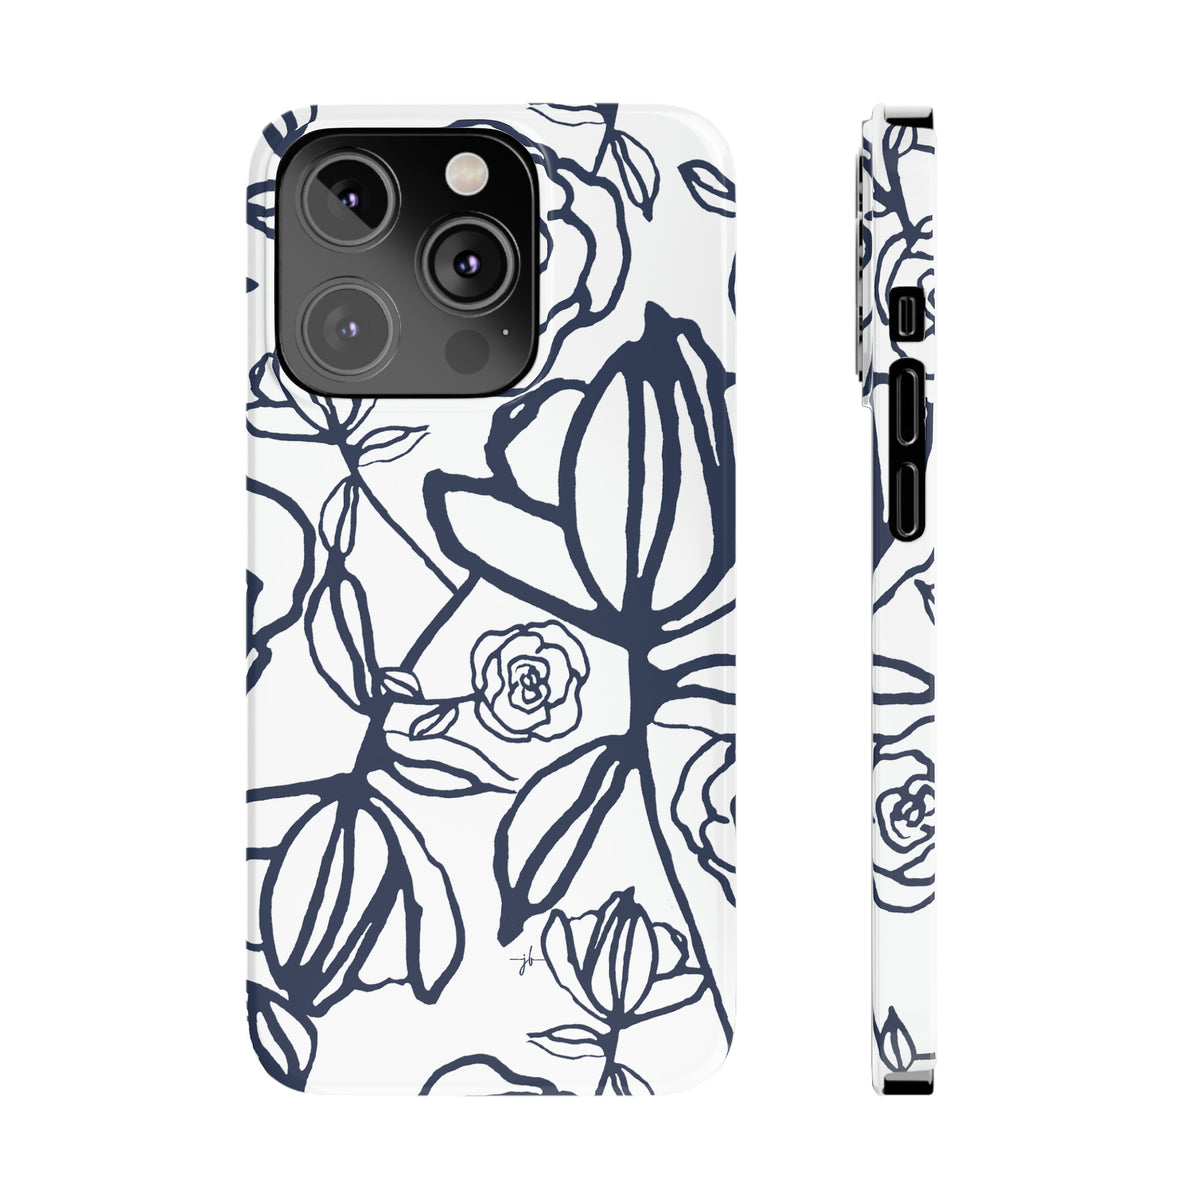 White iPhone case shown from front and side with dark blue rose line drawing in graphic style